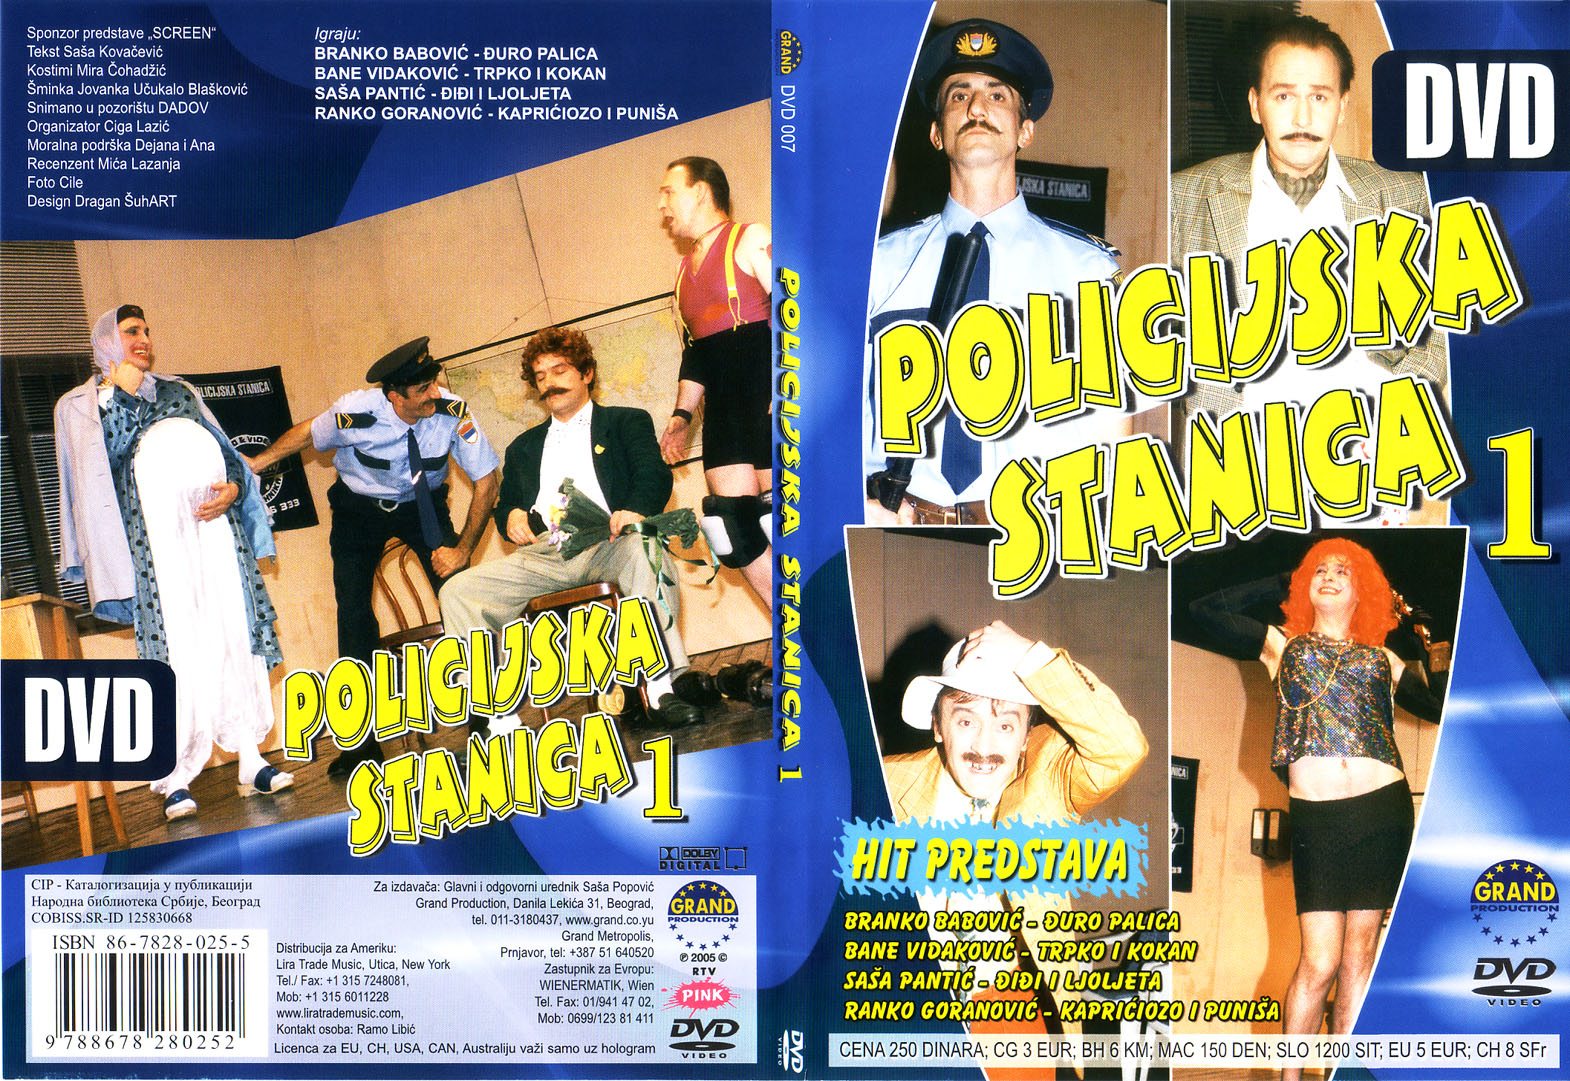 Click to view full size image -  DVD Cover - P - policijska_stanica_1_dvd - policijska_stanica_1_dvd.jpg